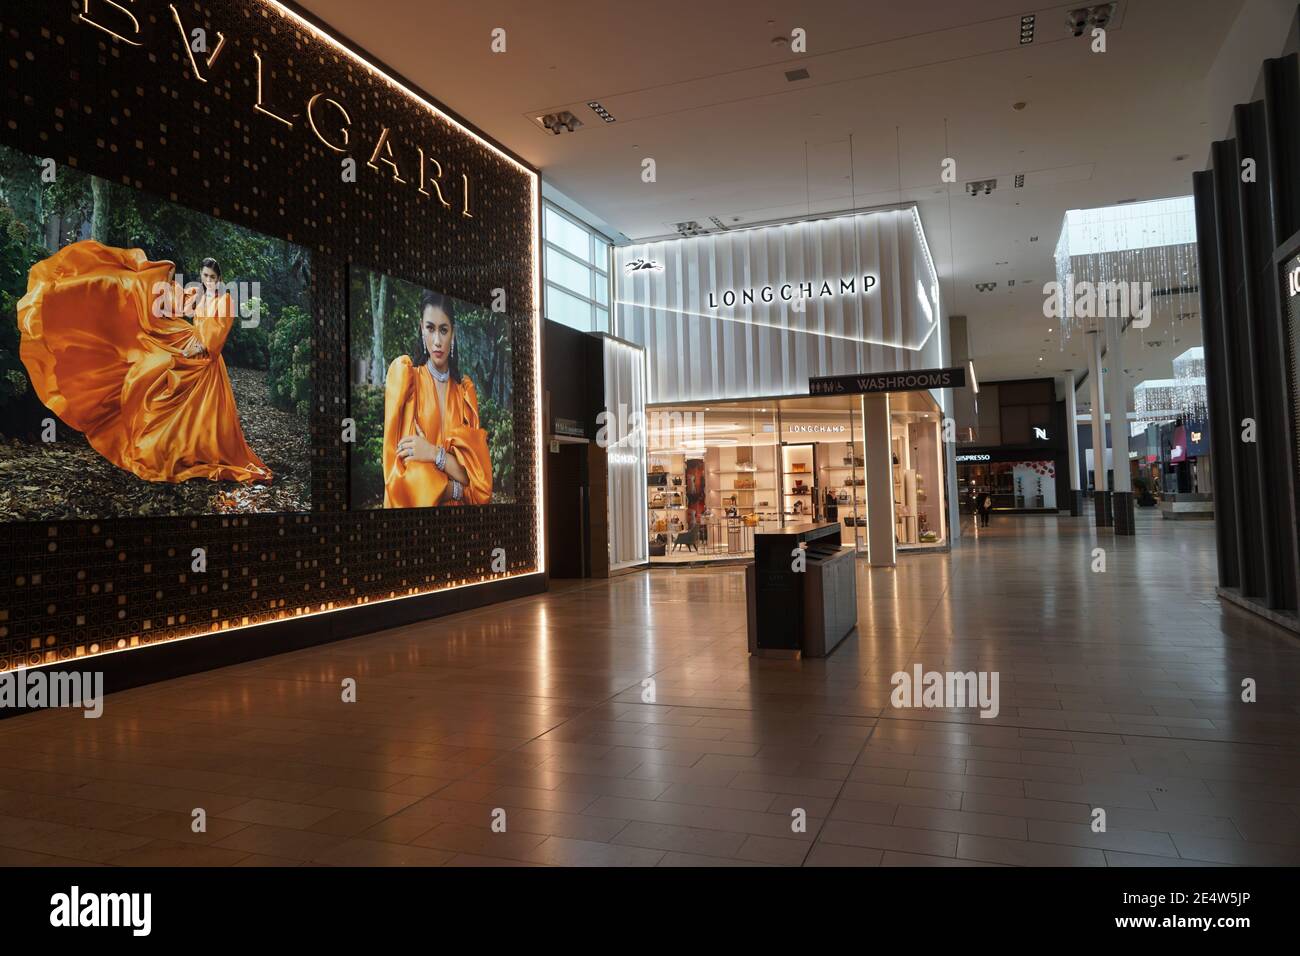 Toronto, Canada - January 24, 2021:  The Yorkdale shopping mall with luxurious stores is in lockdown as a preventive measure against the pandemic. Stock Photo